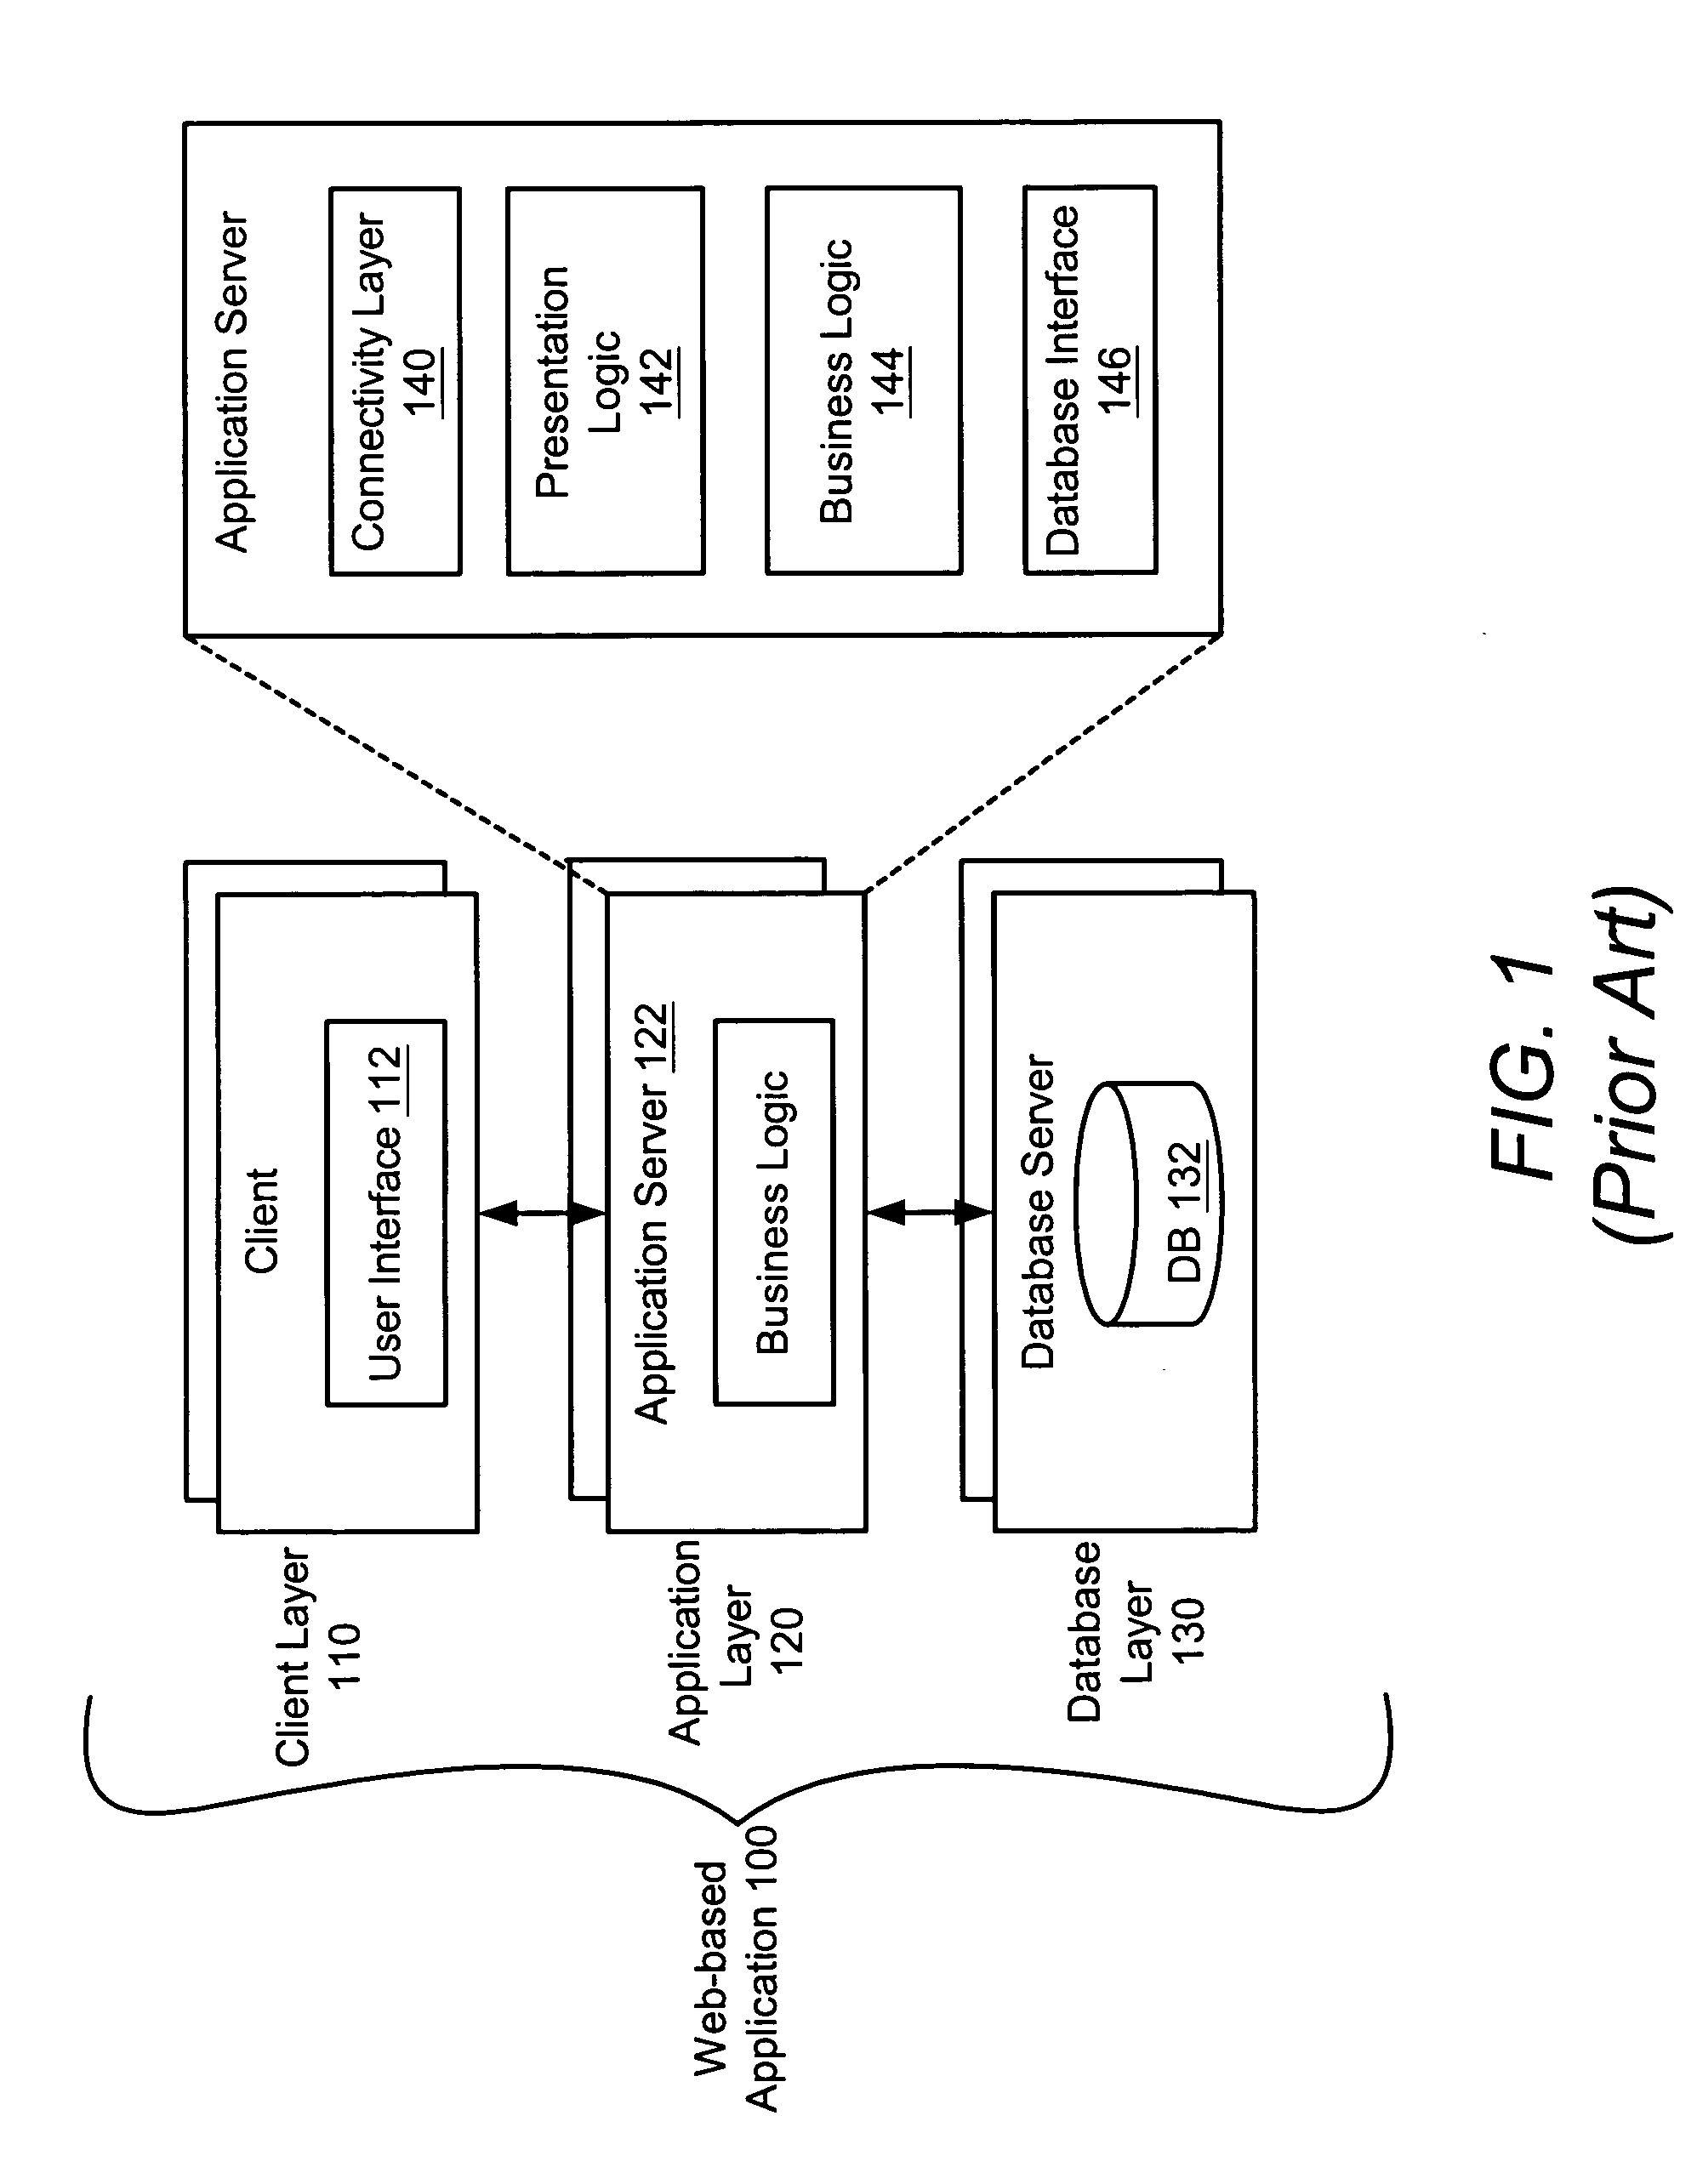 System and method for an optimistic database access